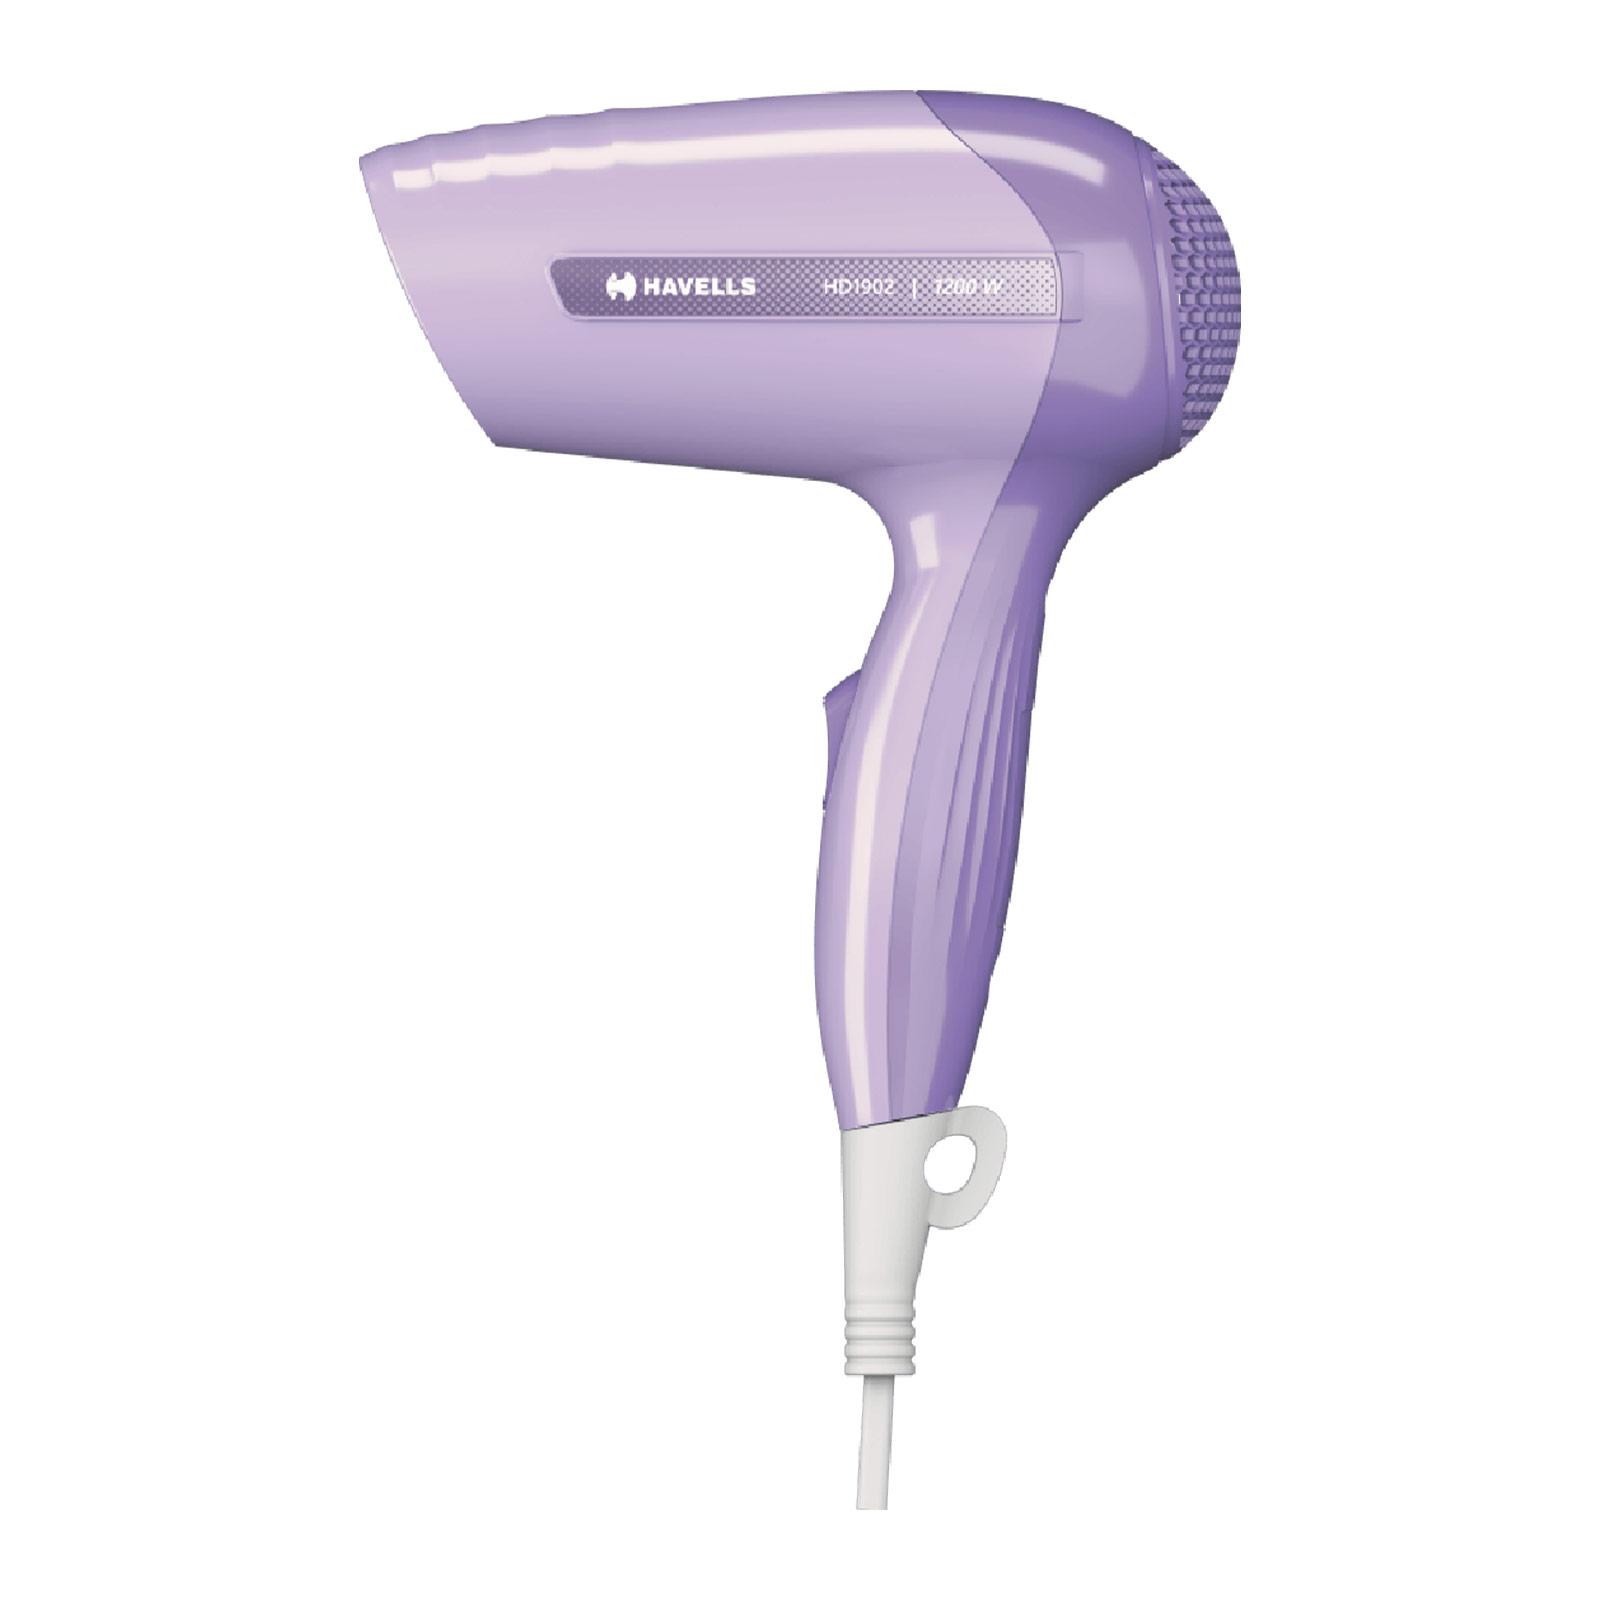 Get the Havells HD1902 Hair Dryer 1200W at best price | Best Online  Shopping in India | Shop Mobiles, Laptops, Home Appliances & more at Best  Offers & Deals!